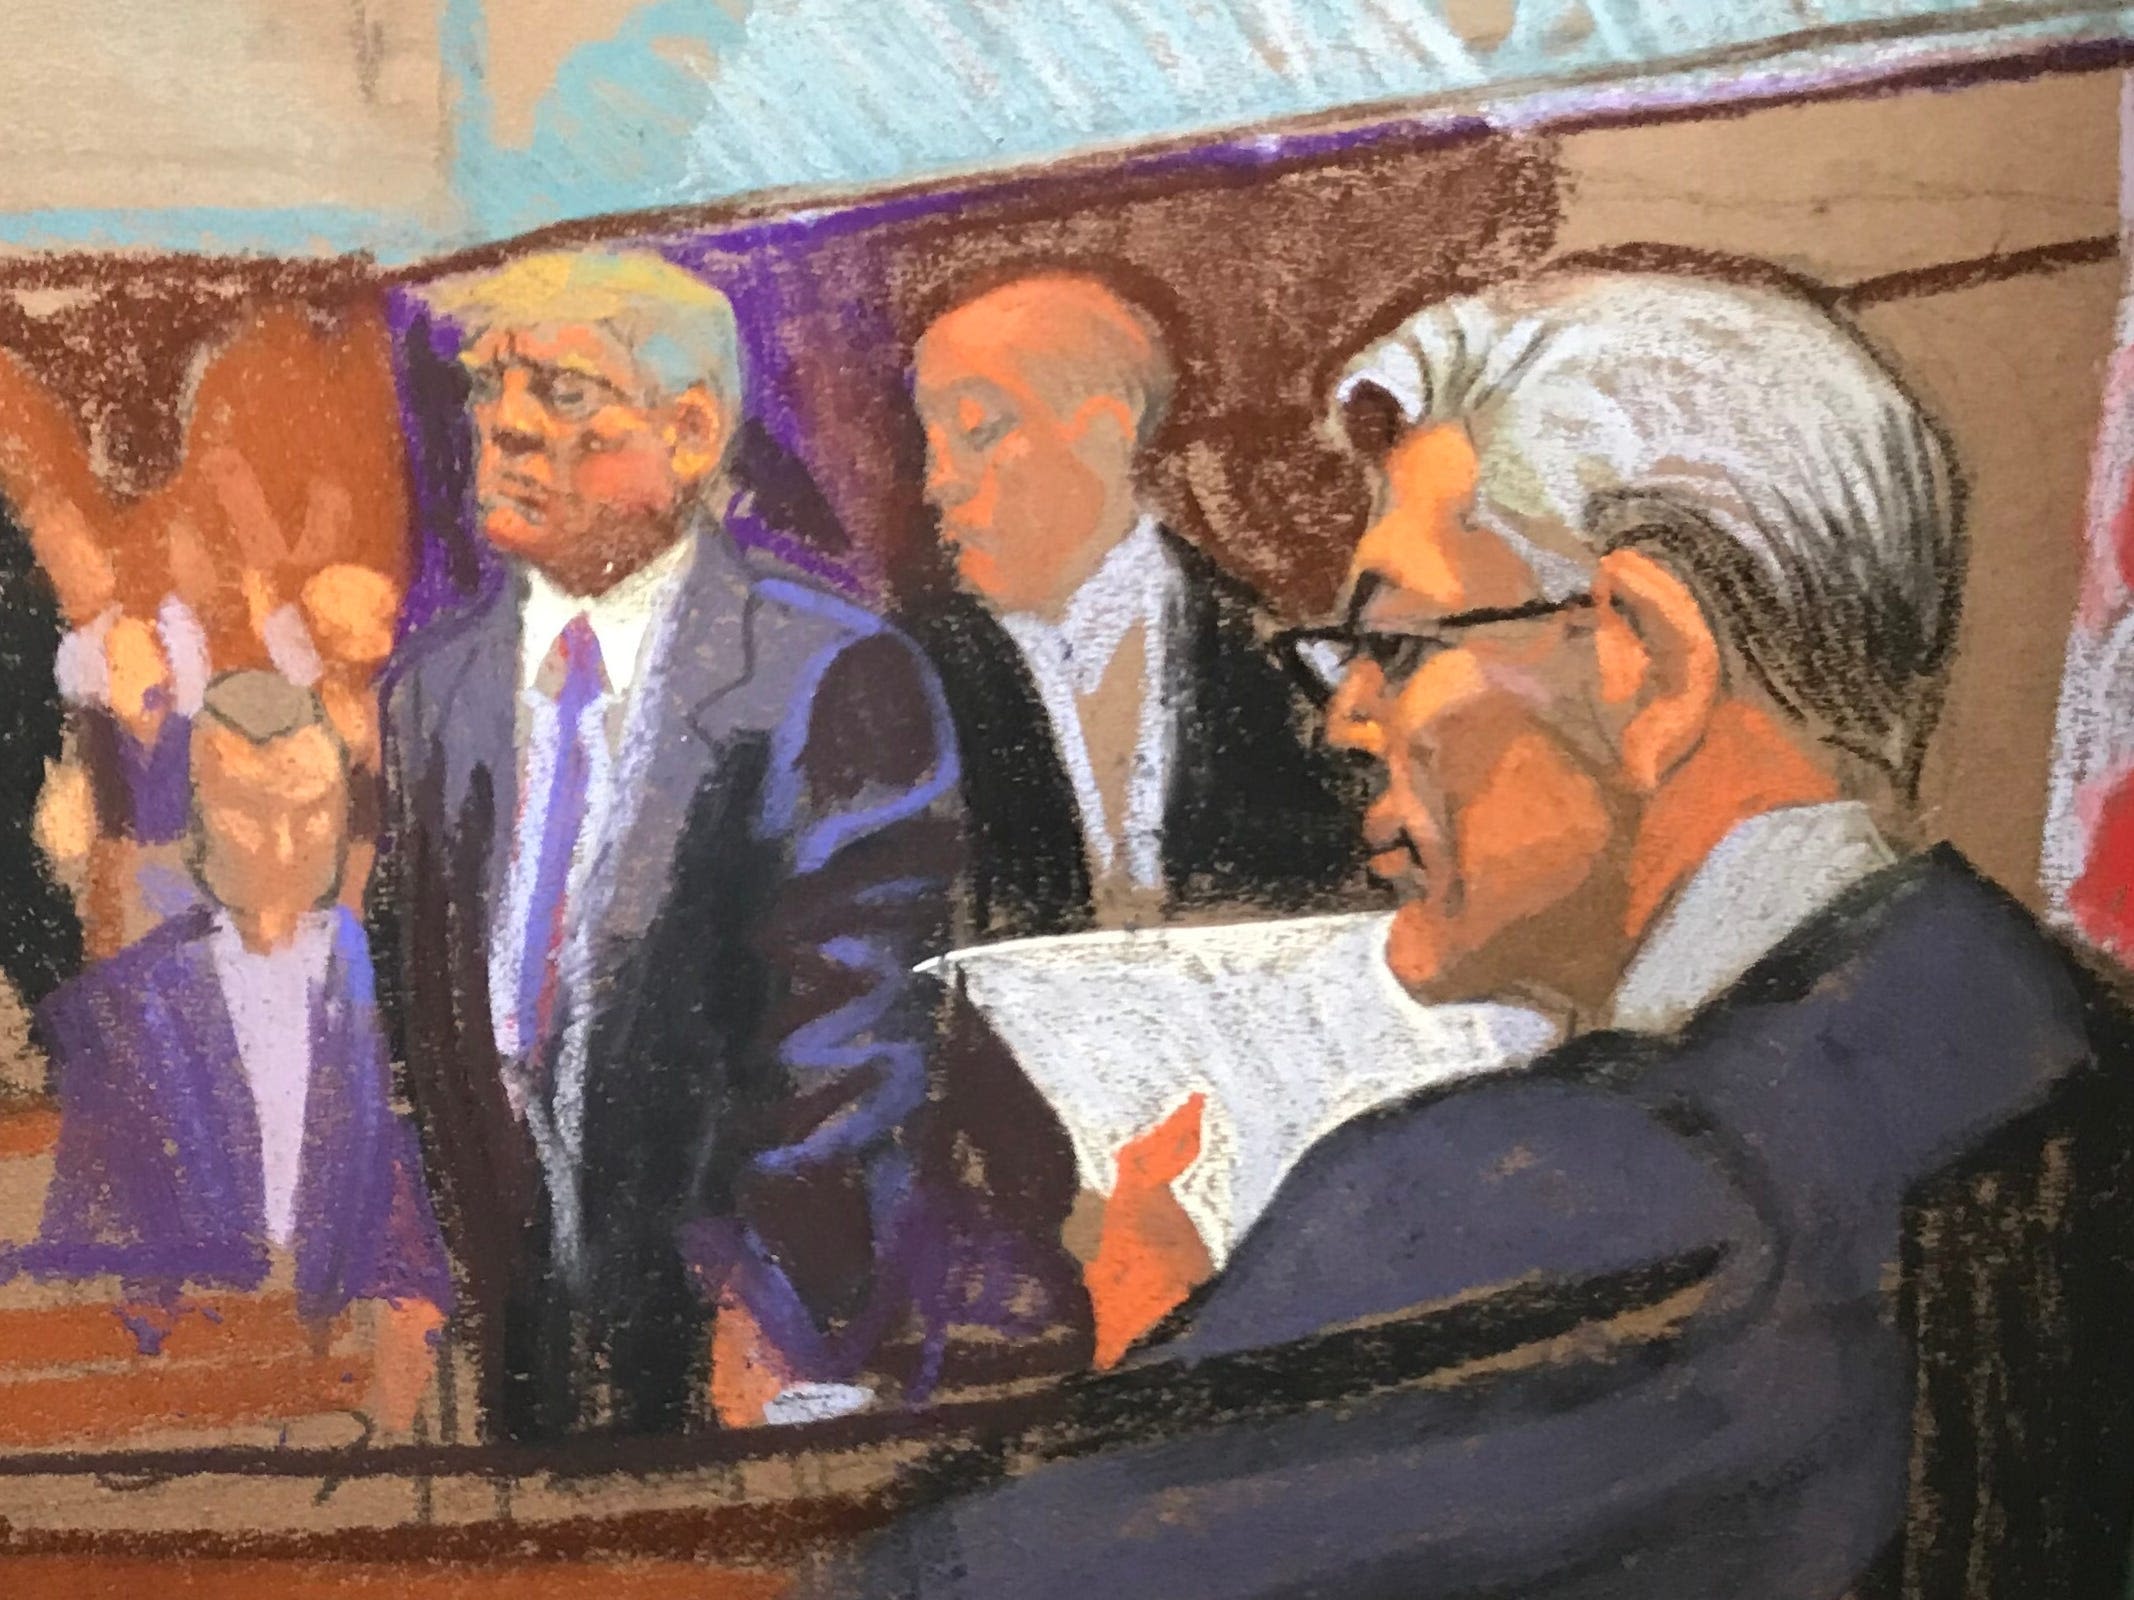 Trump looked 'very demolished' by verdict, says court sketch artist who captured the moment